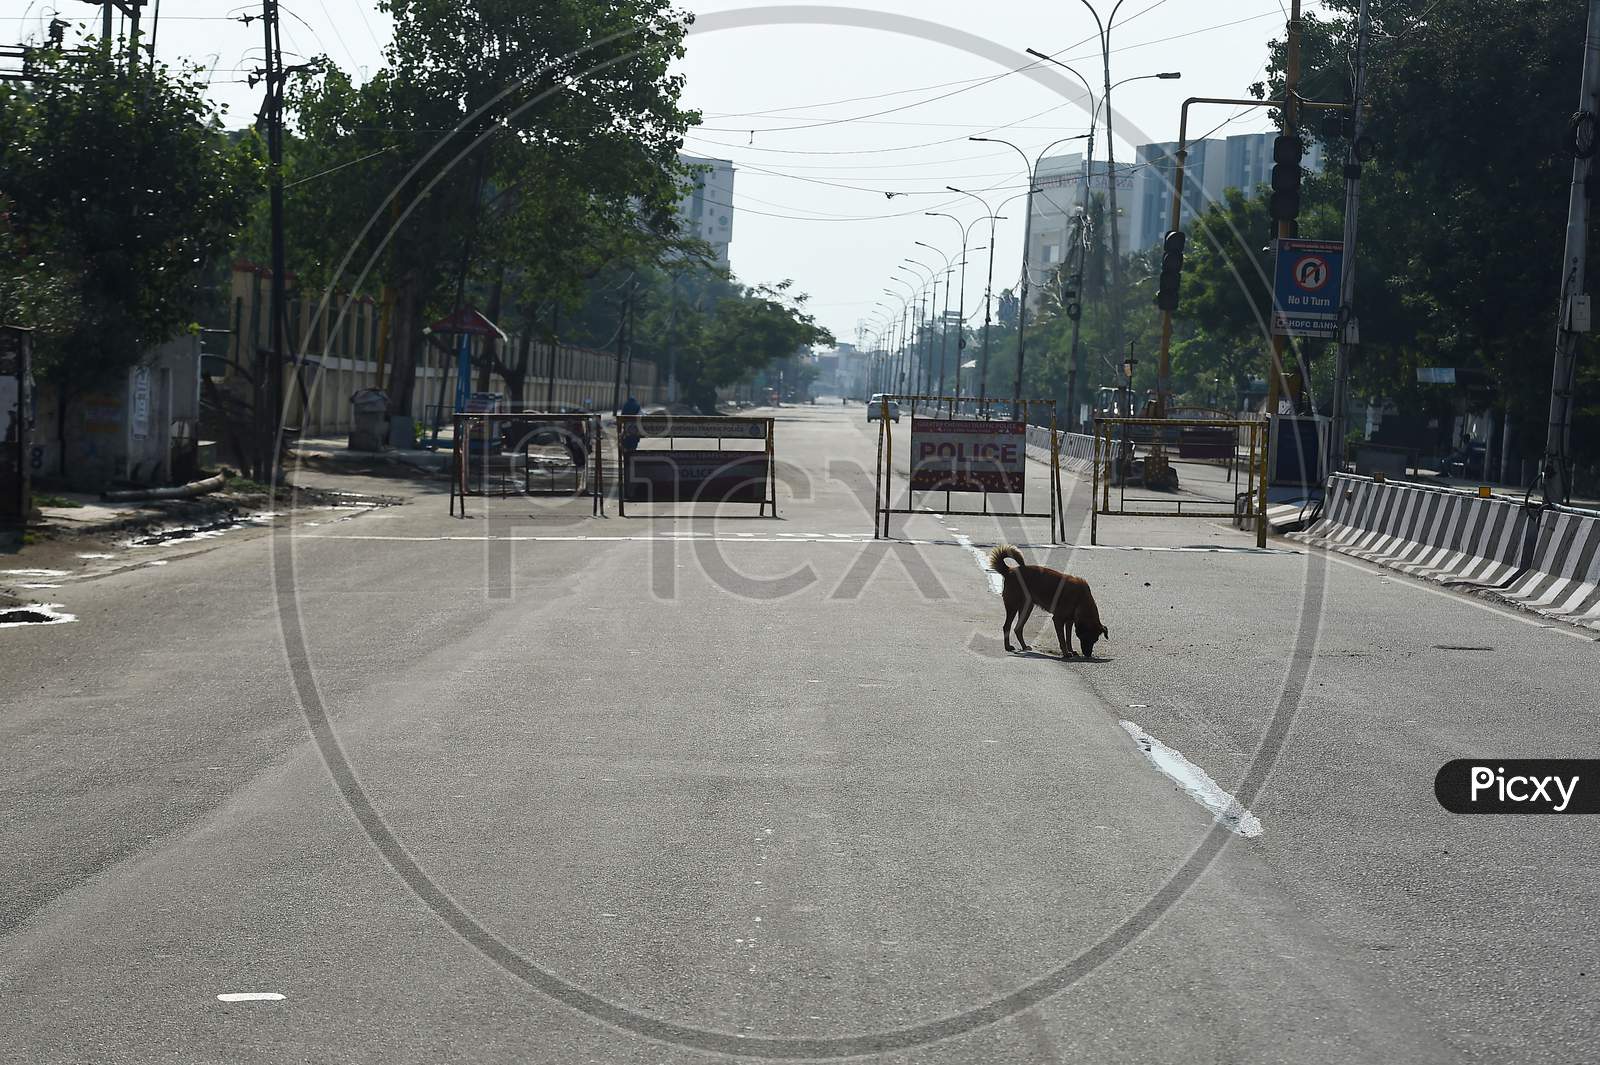 Animals roam around freely on deserted roads during the lockdown in Chennai on July 07, 2020